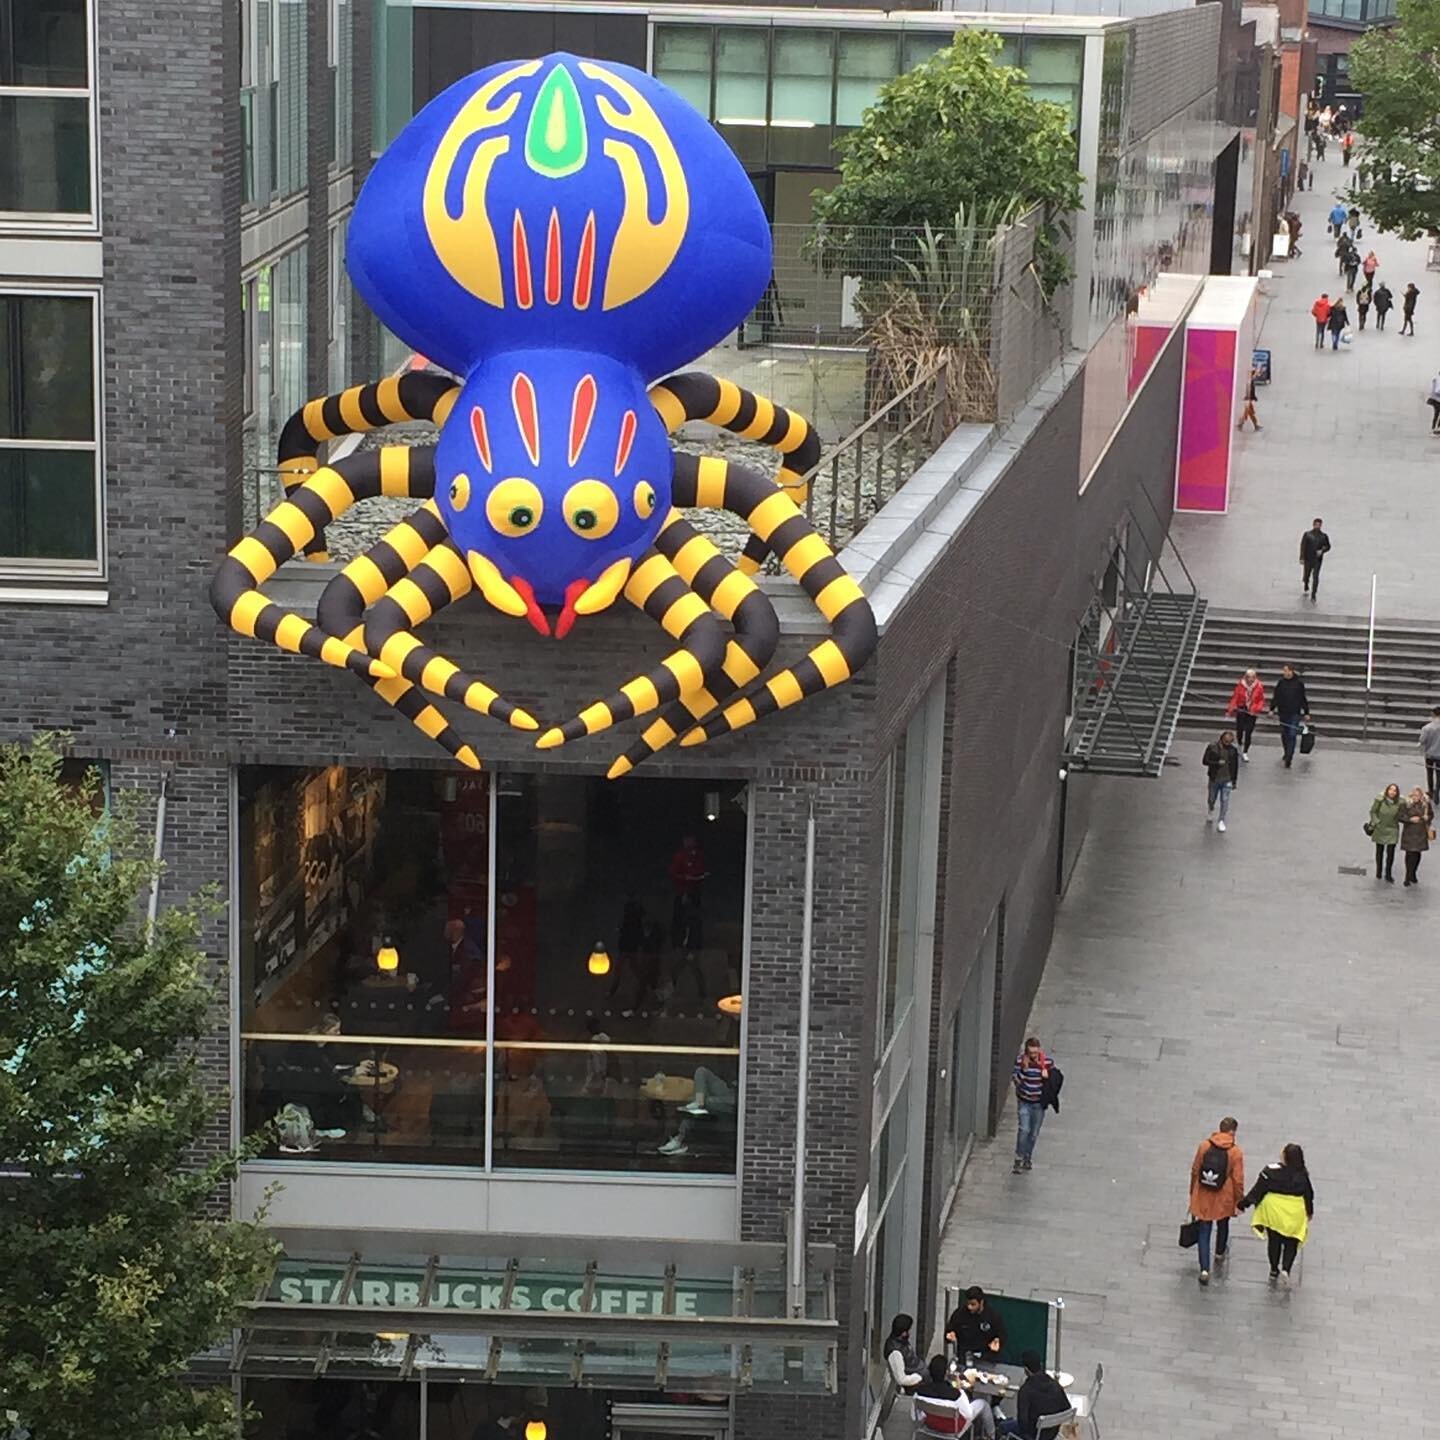 Here&rsquo;s a glimpse of the other side to my creative output when I&rsquo;m not teaching in school. Giant inflatable spider sculpture created for #liverpool1shopping #inflatables #spider #halloween #monsters